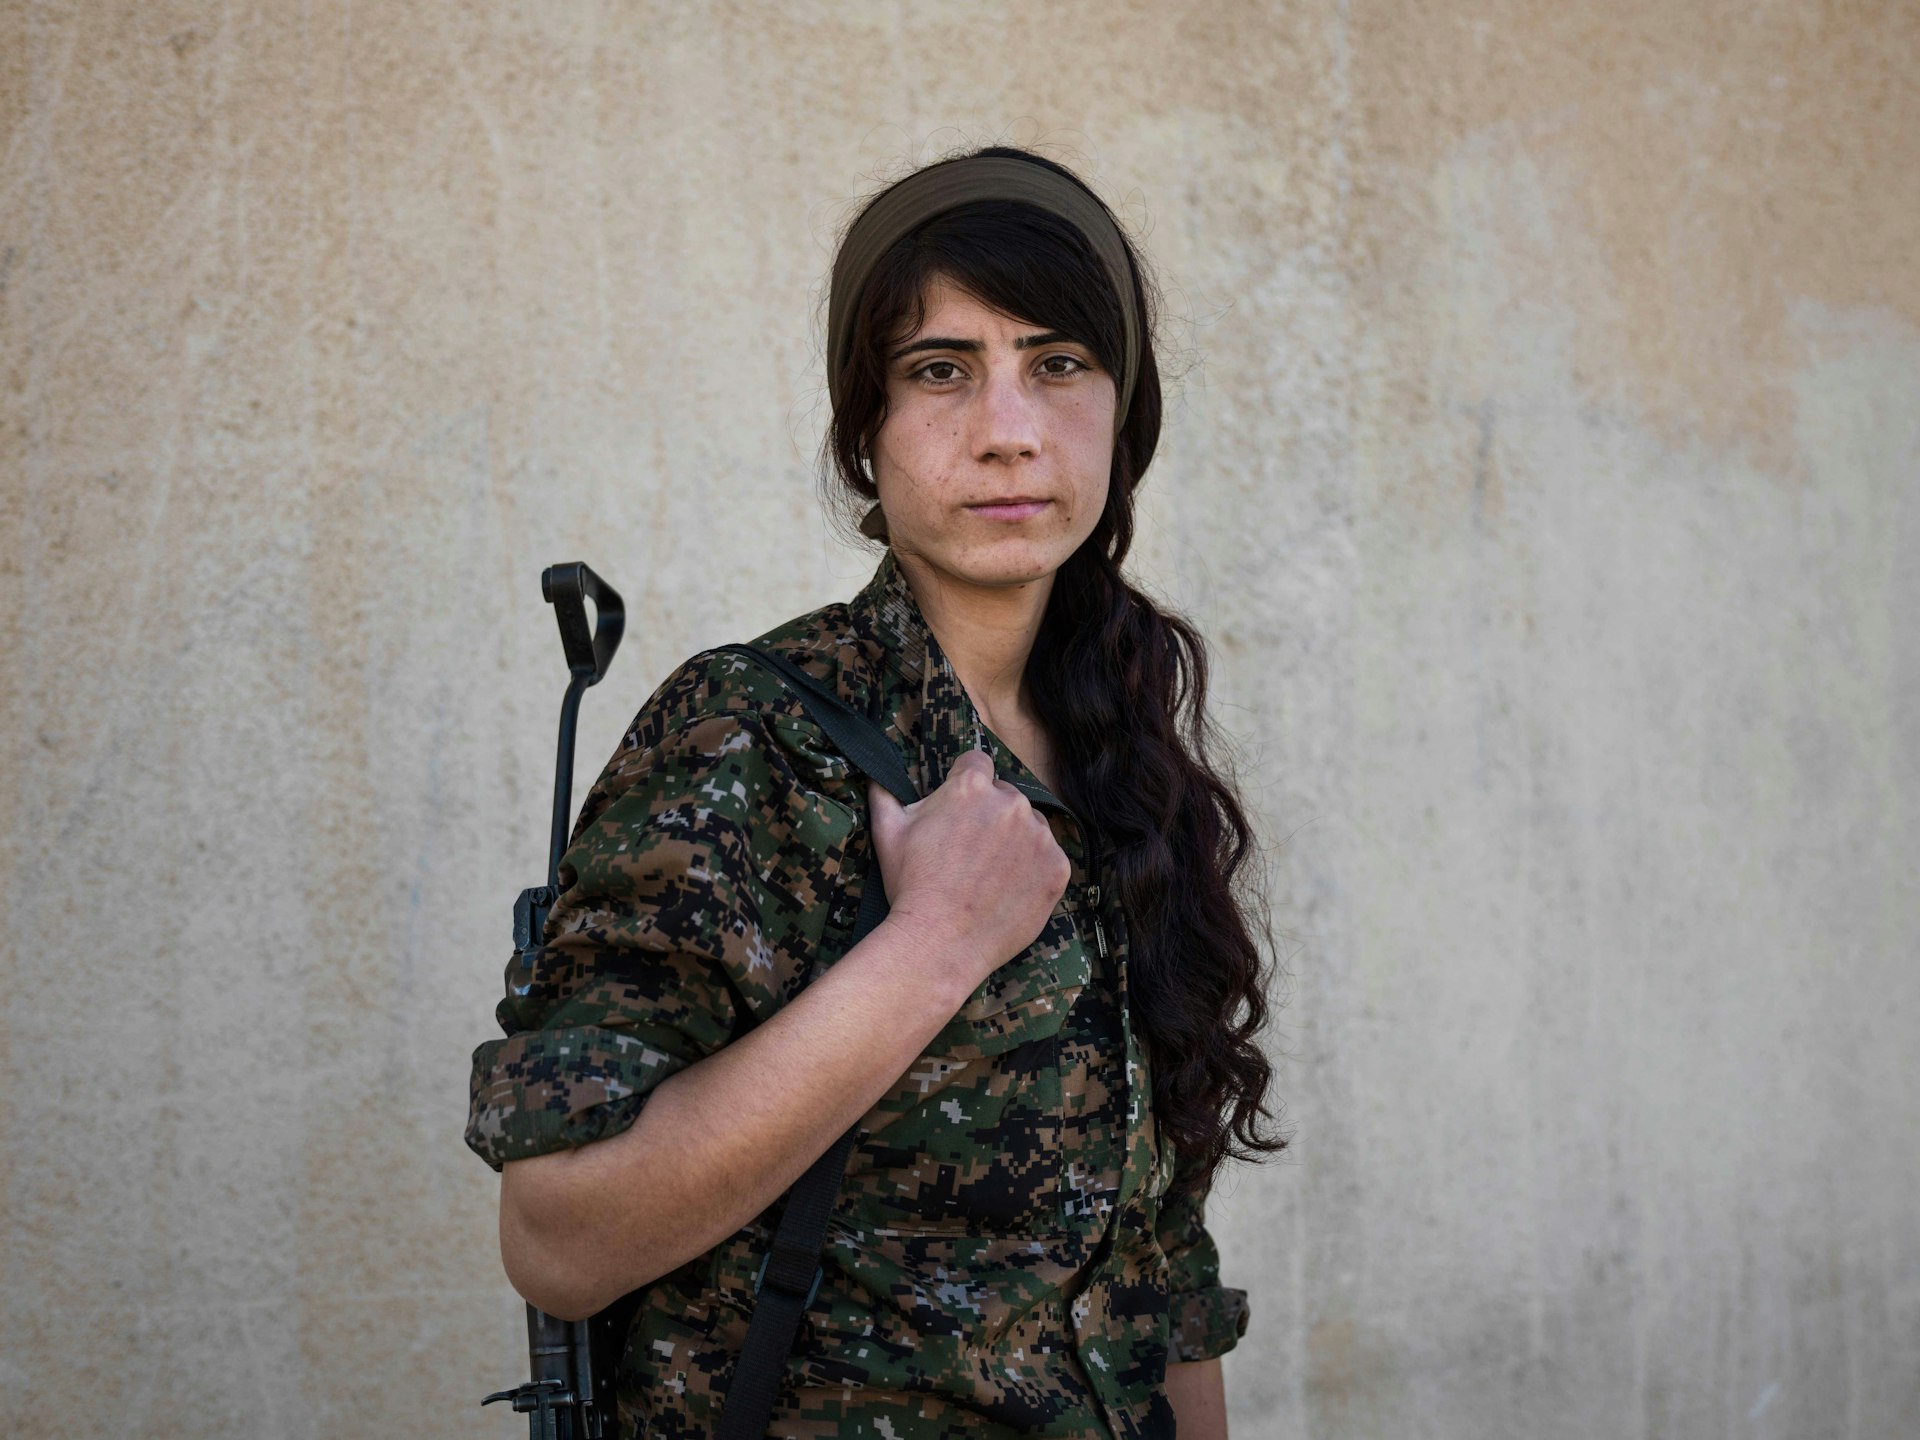 Suzdar, twenty-one, joined YPJ four years ago. “When the revolution happened in Rojava, I knew that I wanted to have a role in it.” © Newsha Tavakolian / Magnum Photos